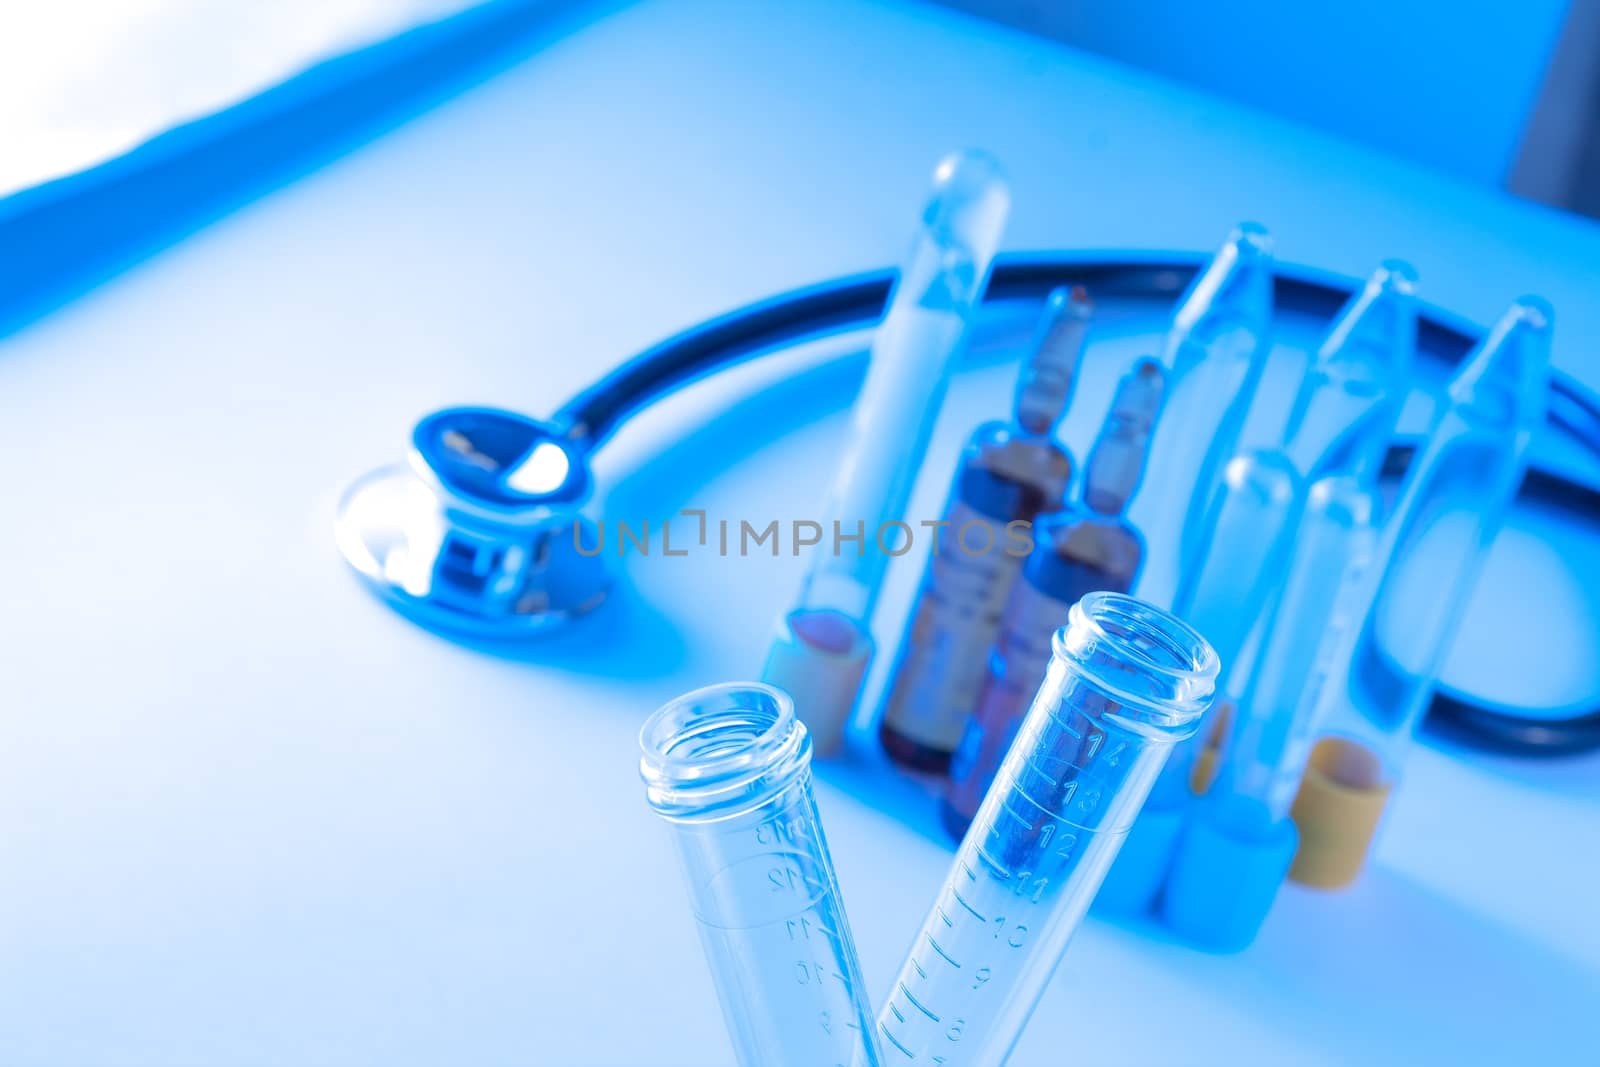 detail of test tubes in laboratory near stethoscope on blue light tint background